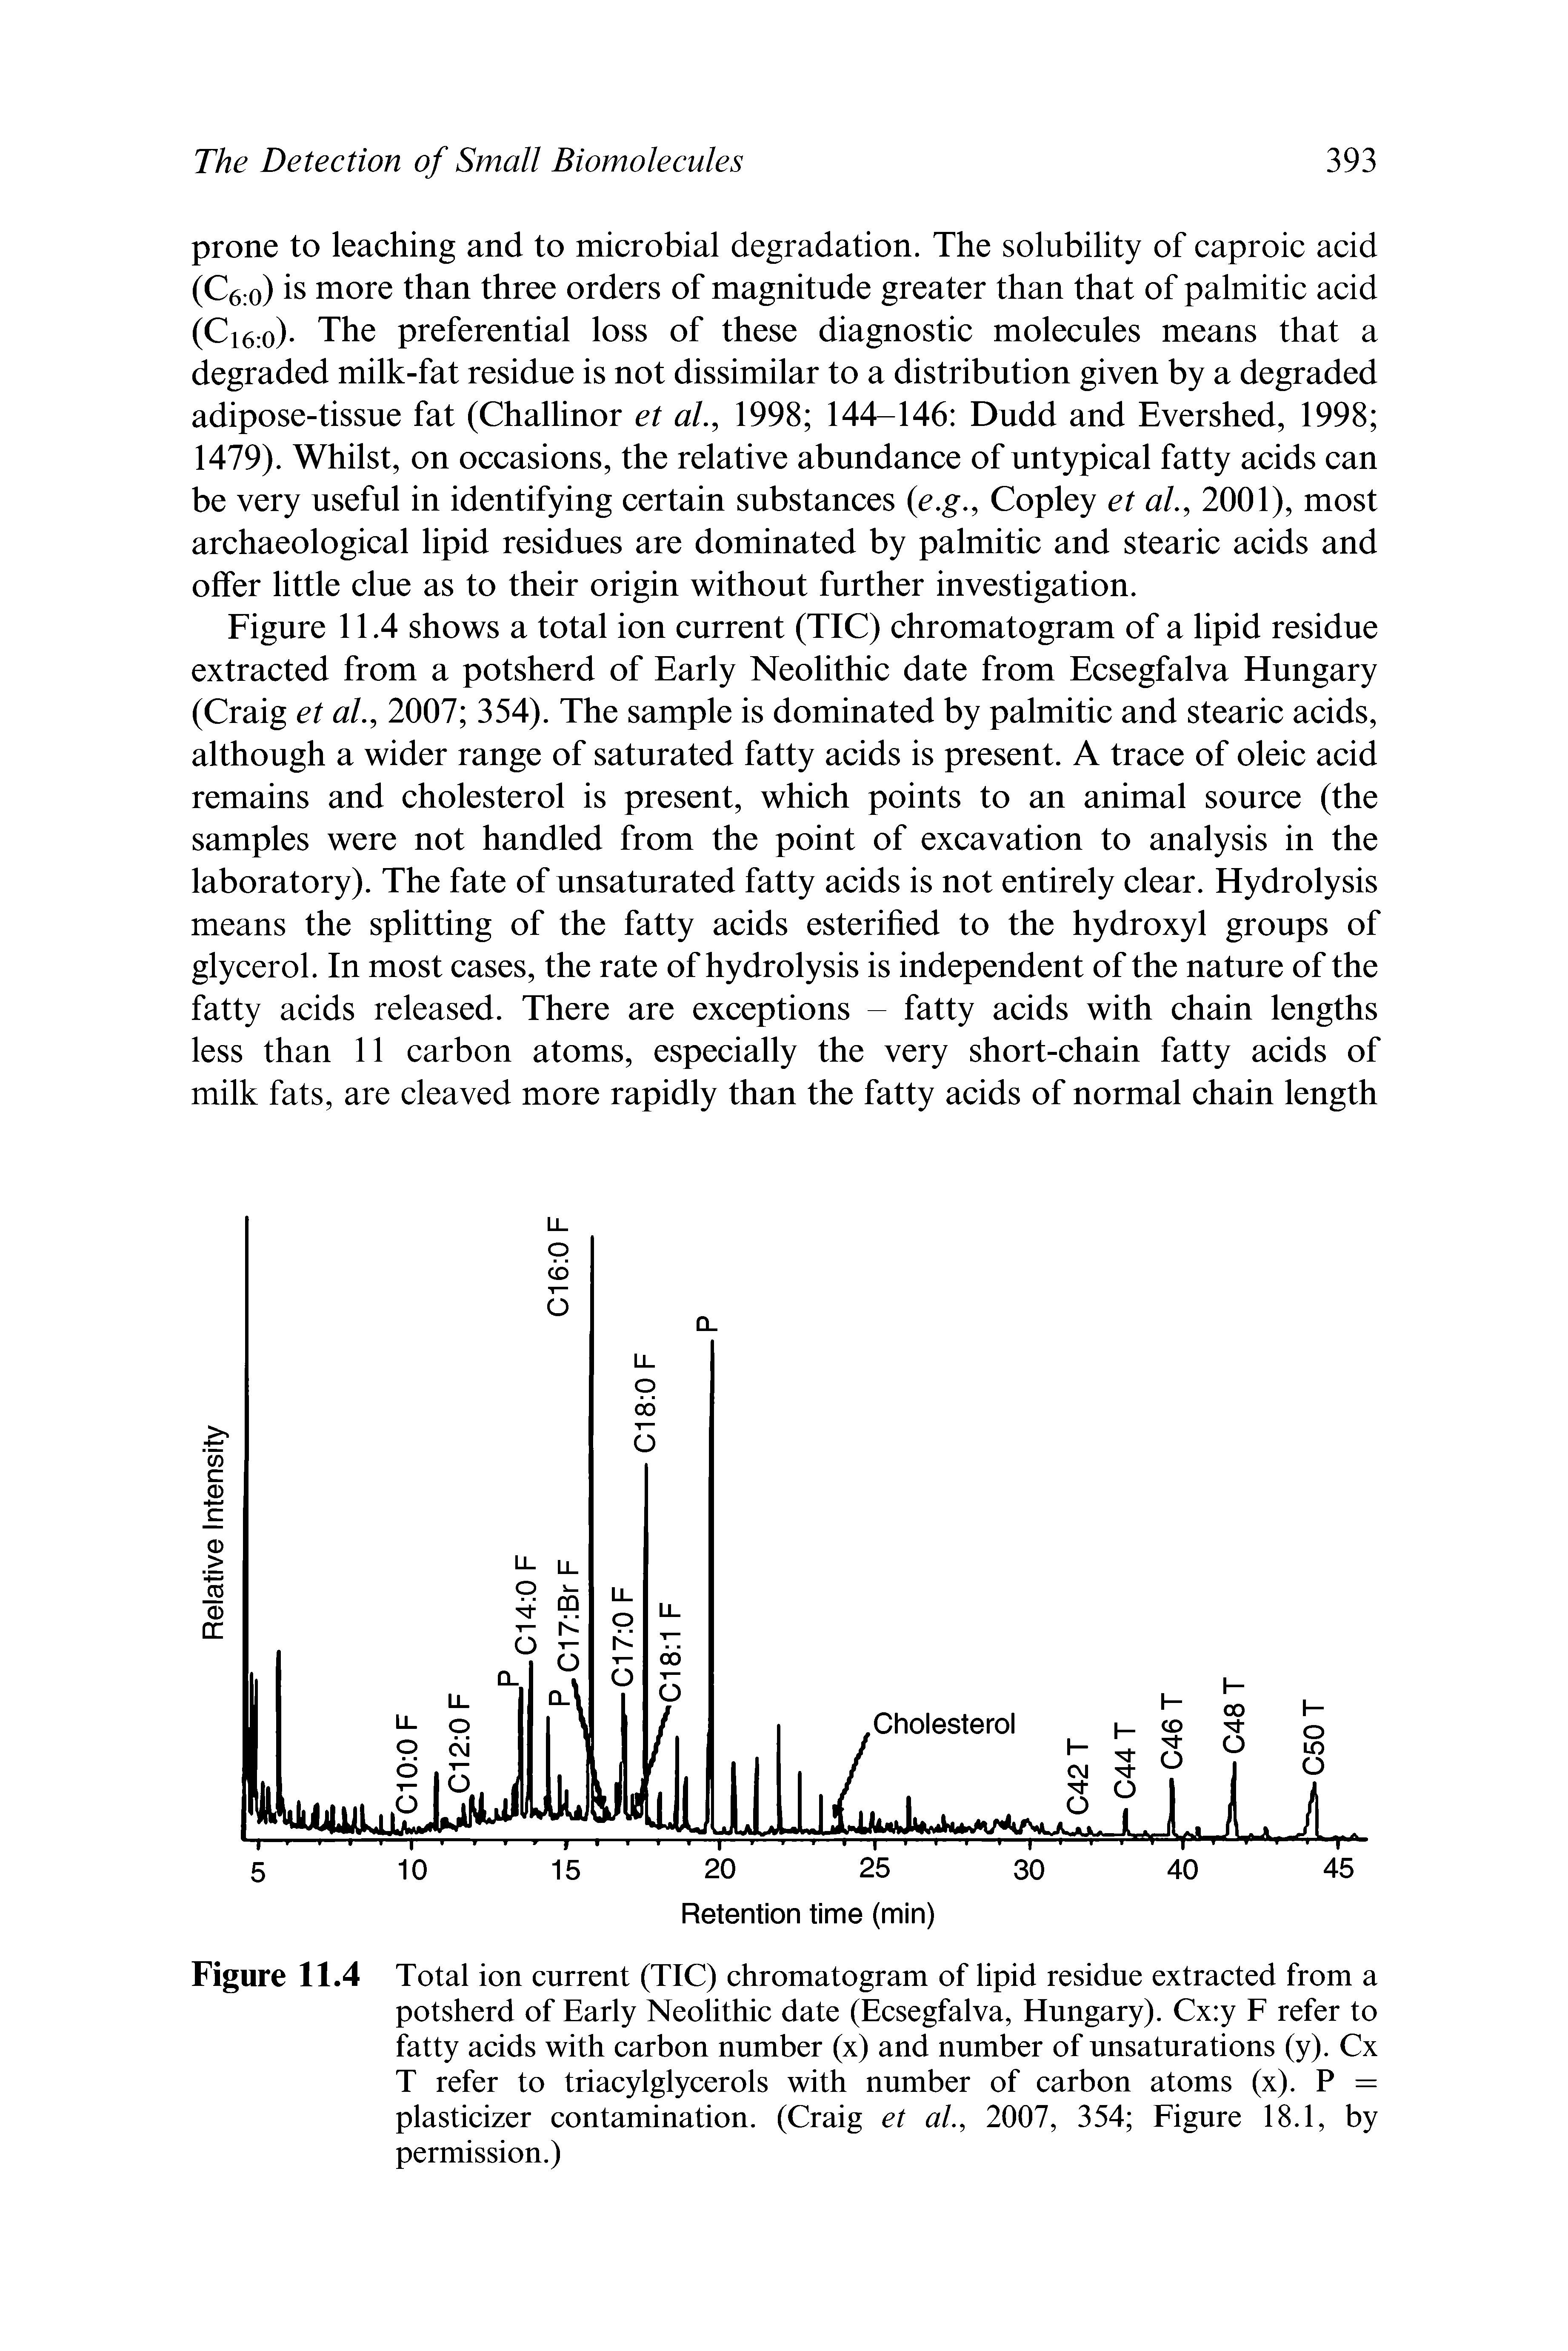 Figure 11.4 Total ion current (TIC) chromatogram of lipid residue extracted from a potsherd of Early Neolithic date (Ecsegfalva, Hungary). Cx y F refer to fatty acids with carbon number (x) and number of unsaturations (y). Cx T refer to triacylglycerols with number of carbon atoms (x). P = plasticizer contamination. (Craig et al., 2007, 354 Figure 18.1, by permission.)...